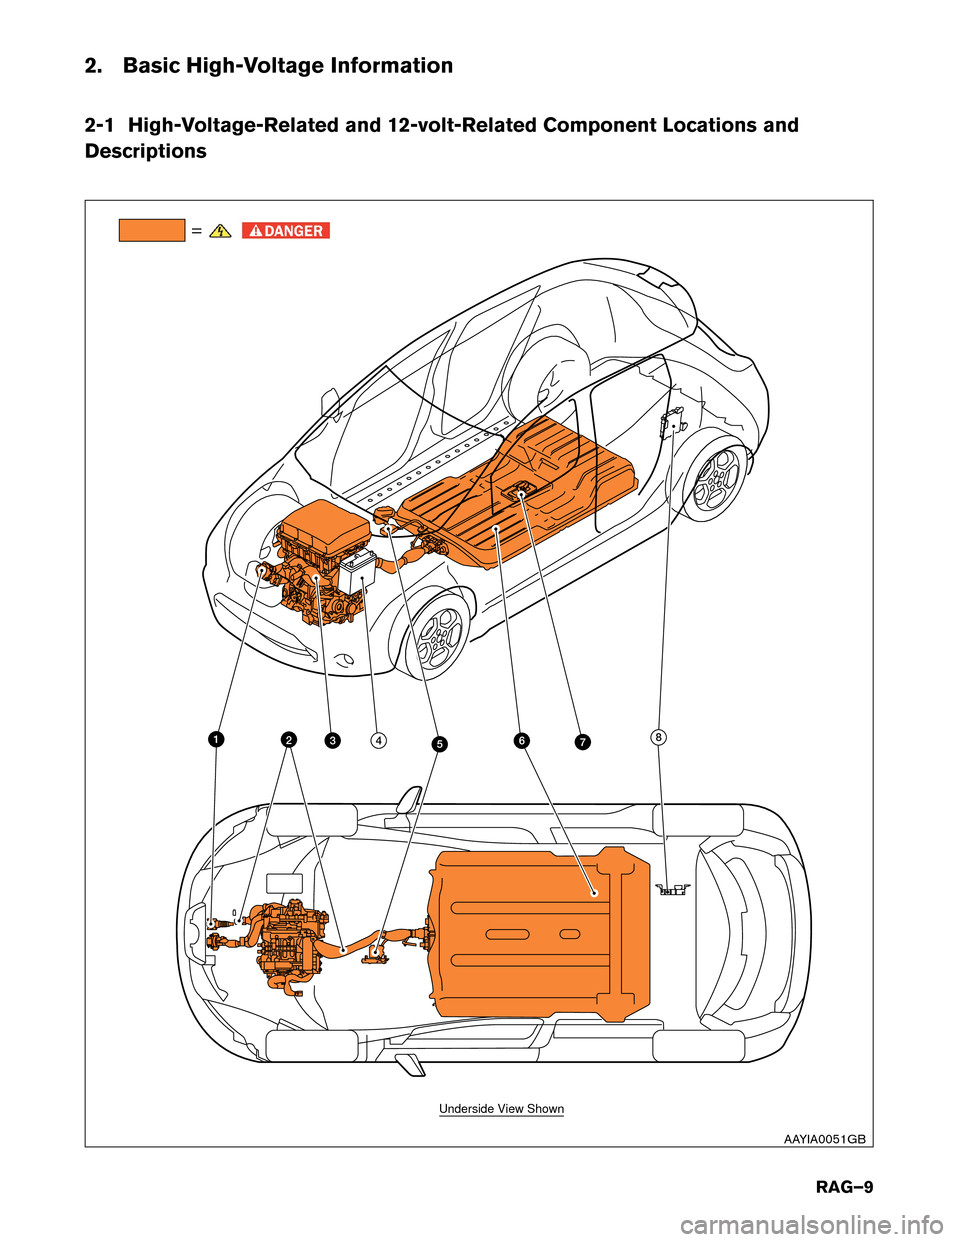 NISSAN LEAF 2017 1.G Roadside Assistance Guide 2. Basic High-Voltage Information
2-1
High-Voltage-Related and 12-volt-Related Component Locations and
Descriptions =
76
342 8
5 1
Underside View Shown
AAYIA0051GB
RAG–9  